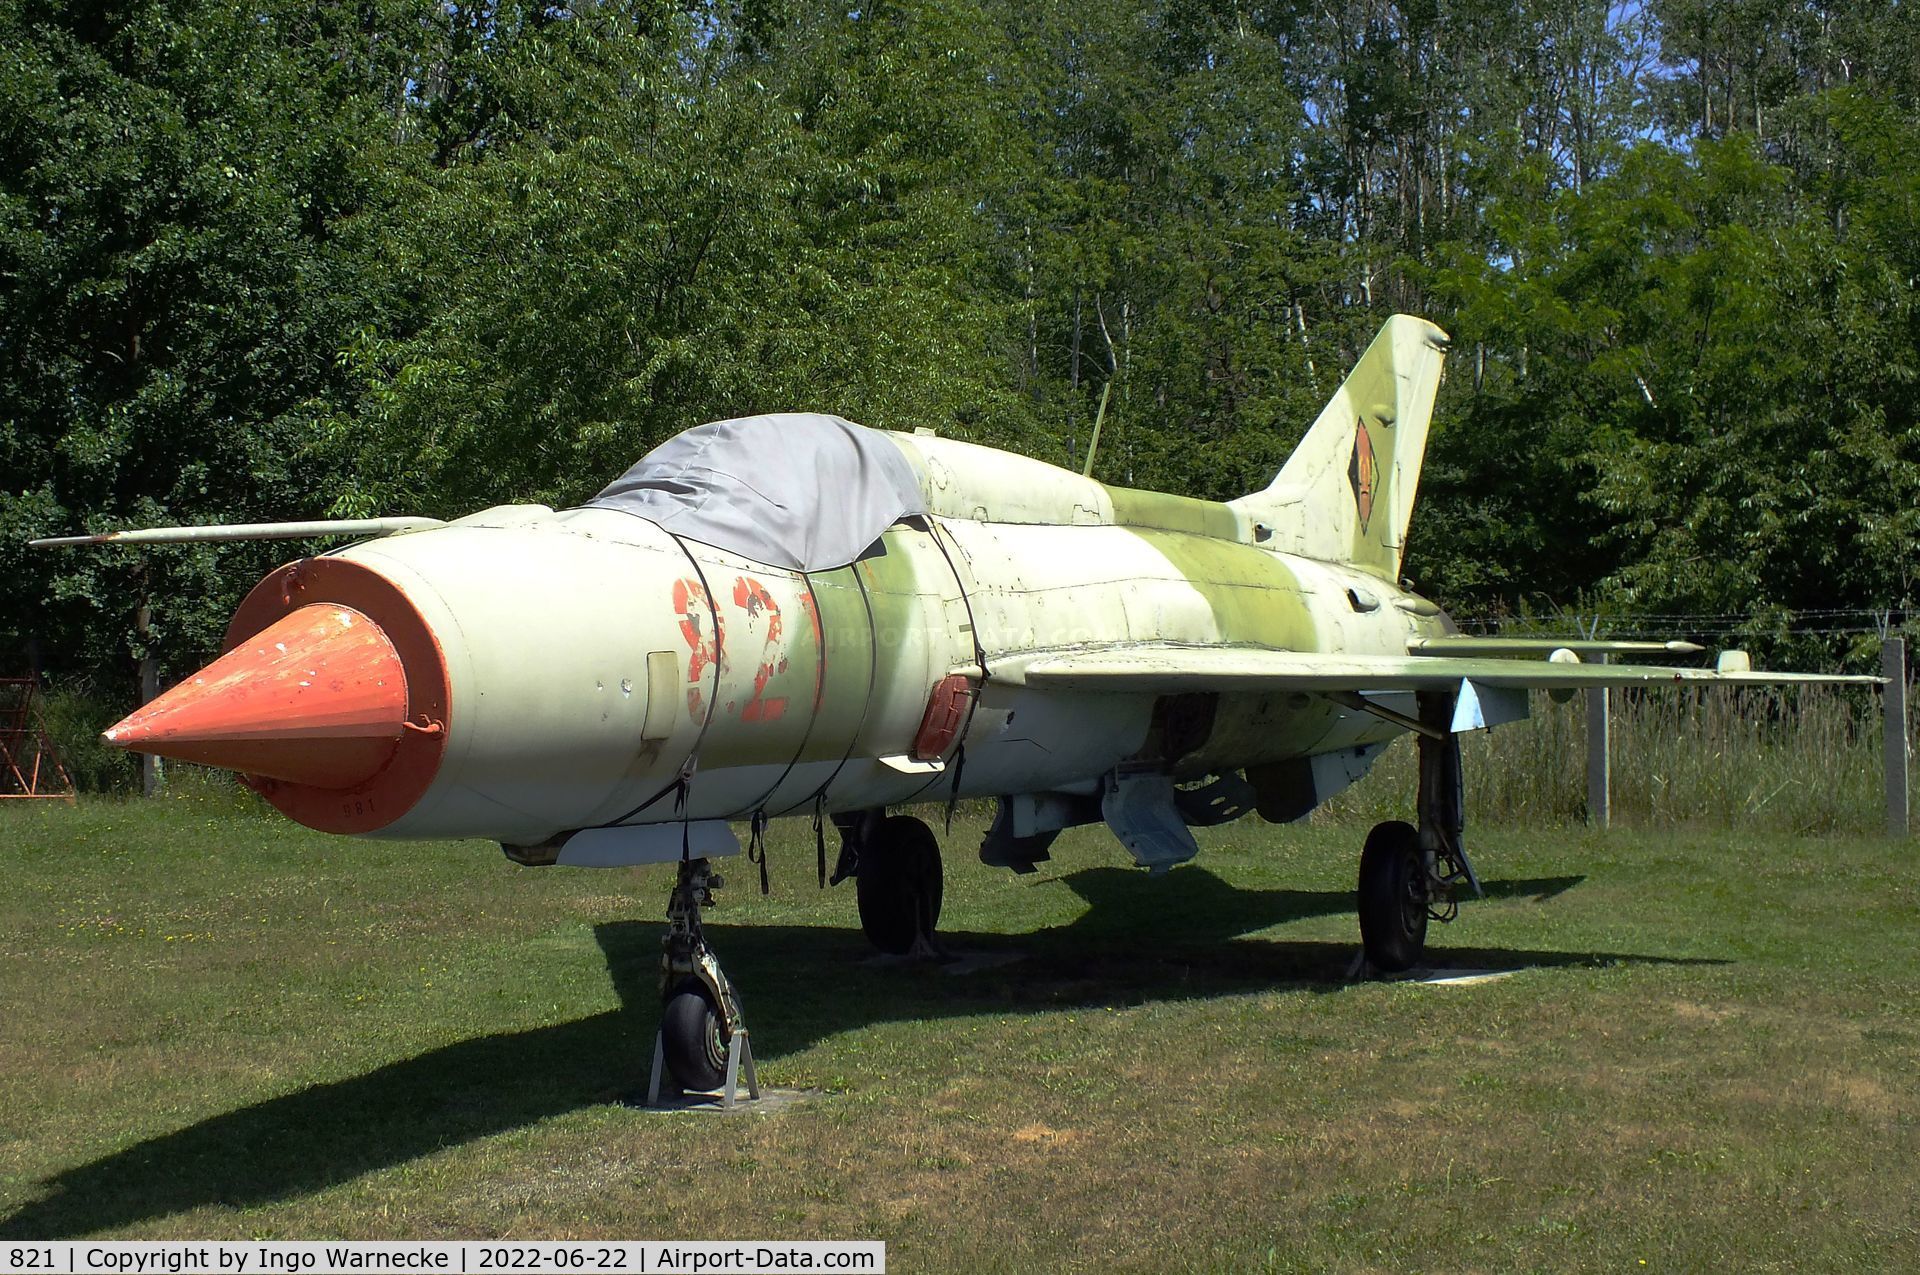 821, Mikoyan-Gurevich MiG-21PF C/N 0604, Mikoyan i Gurevich MiG-21PF (modified for east-german air force, locally called 'MiG-21PFM') FISHBED-D at the Flugplatzmuseum Cottbus (Cottbus airfield museum)